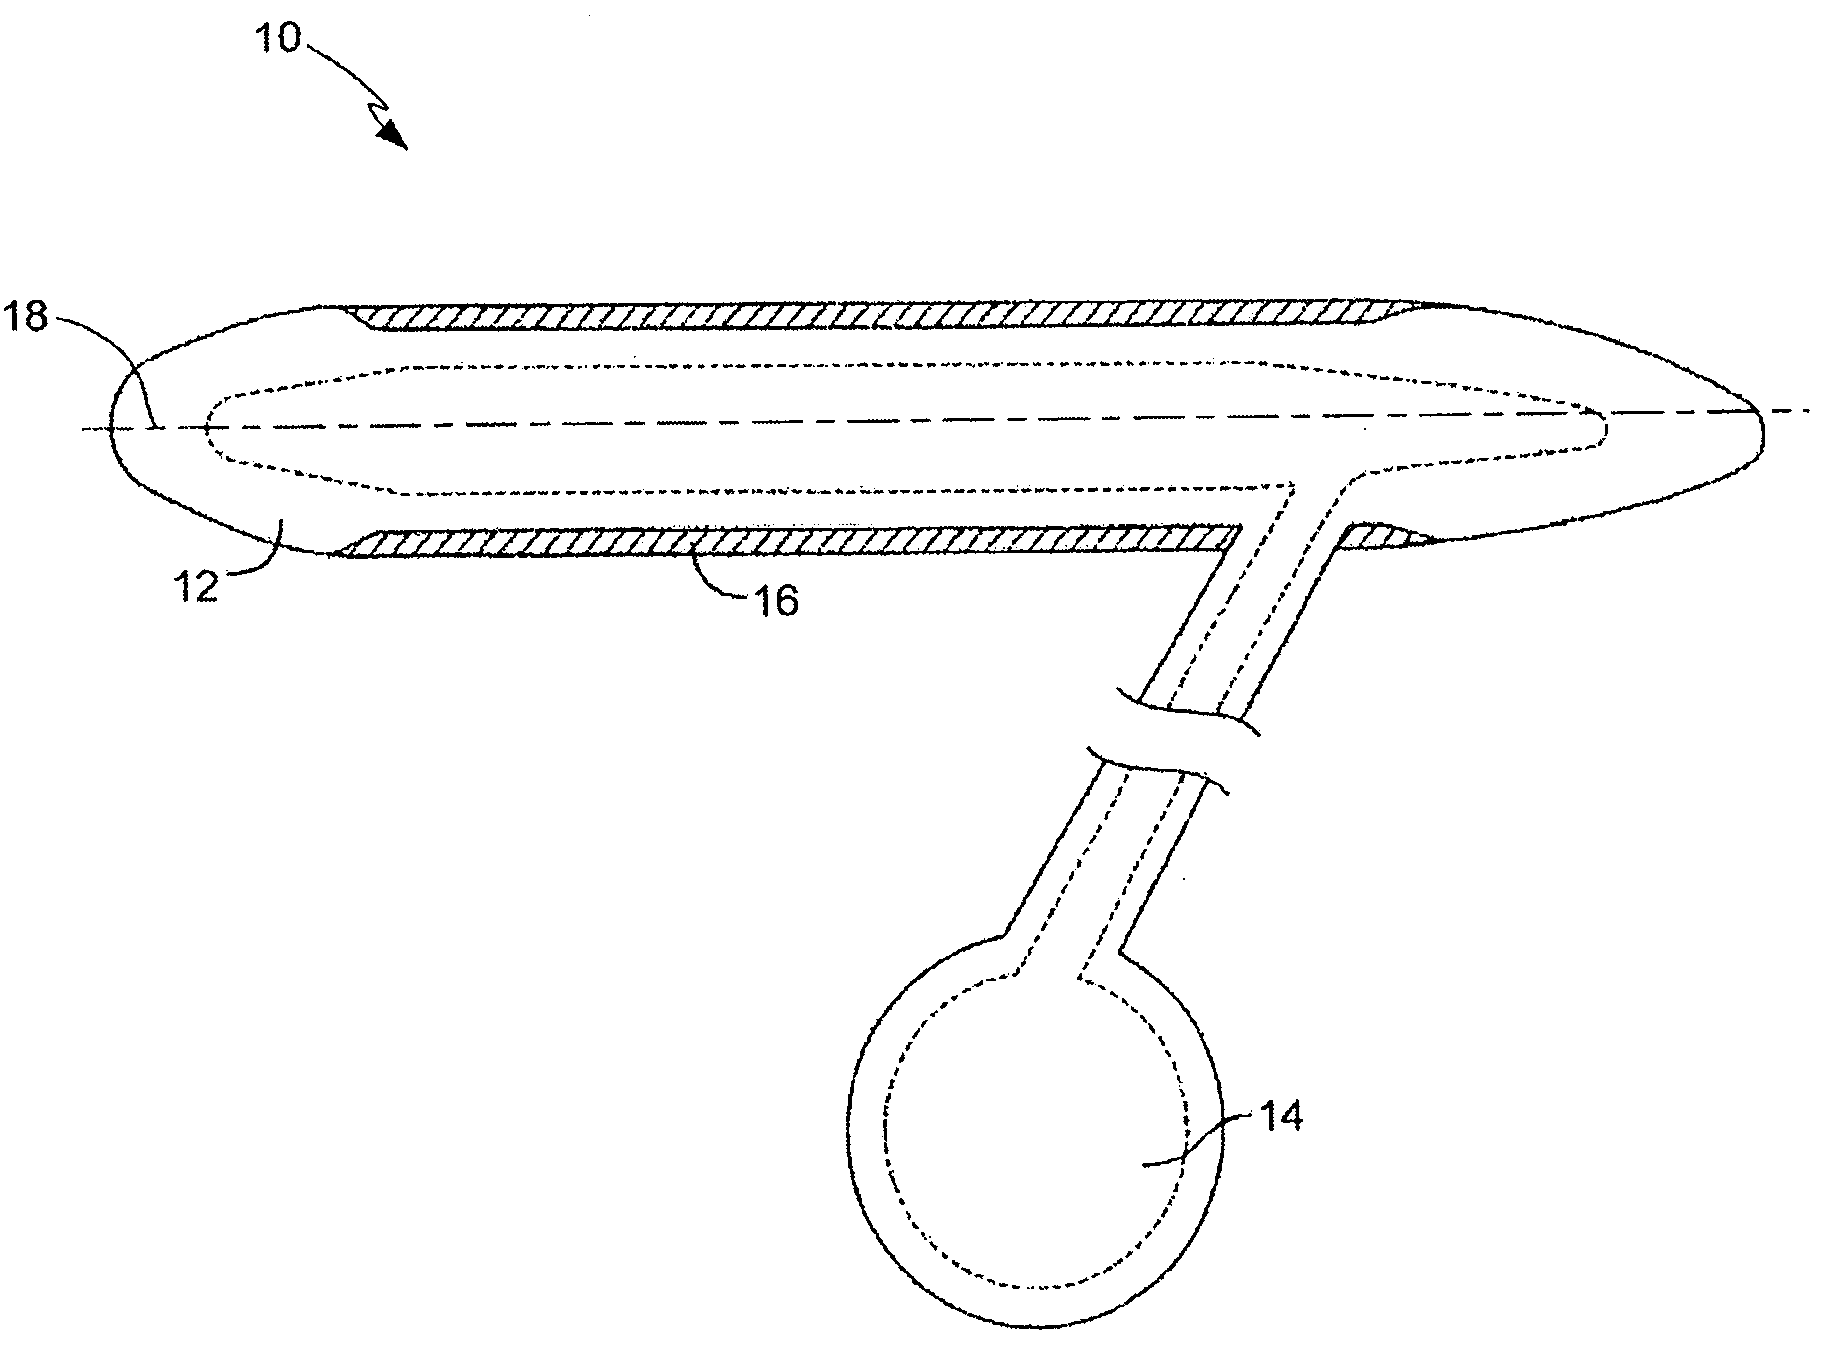 Corrugated Expansion-Constraining Sleeve for an Inflatable Penile Prosthesis Cylinder